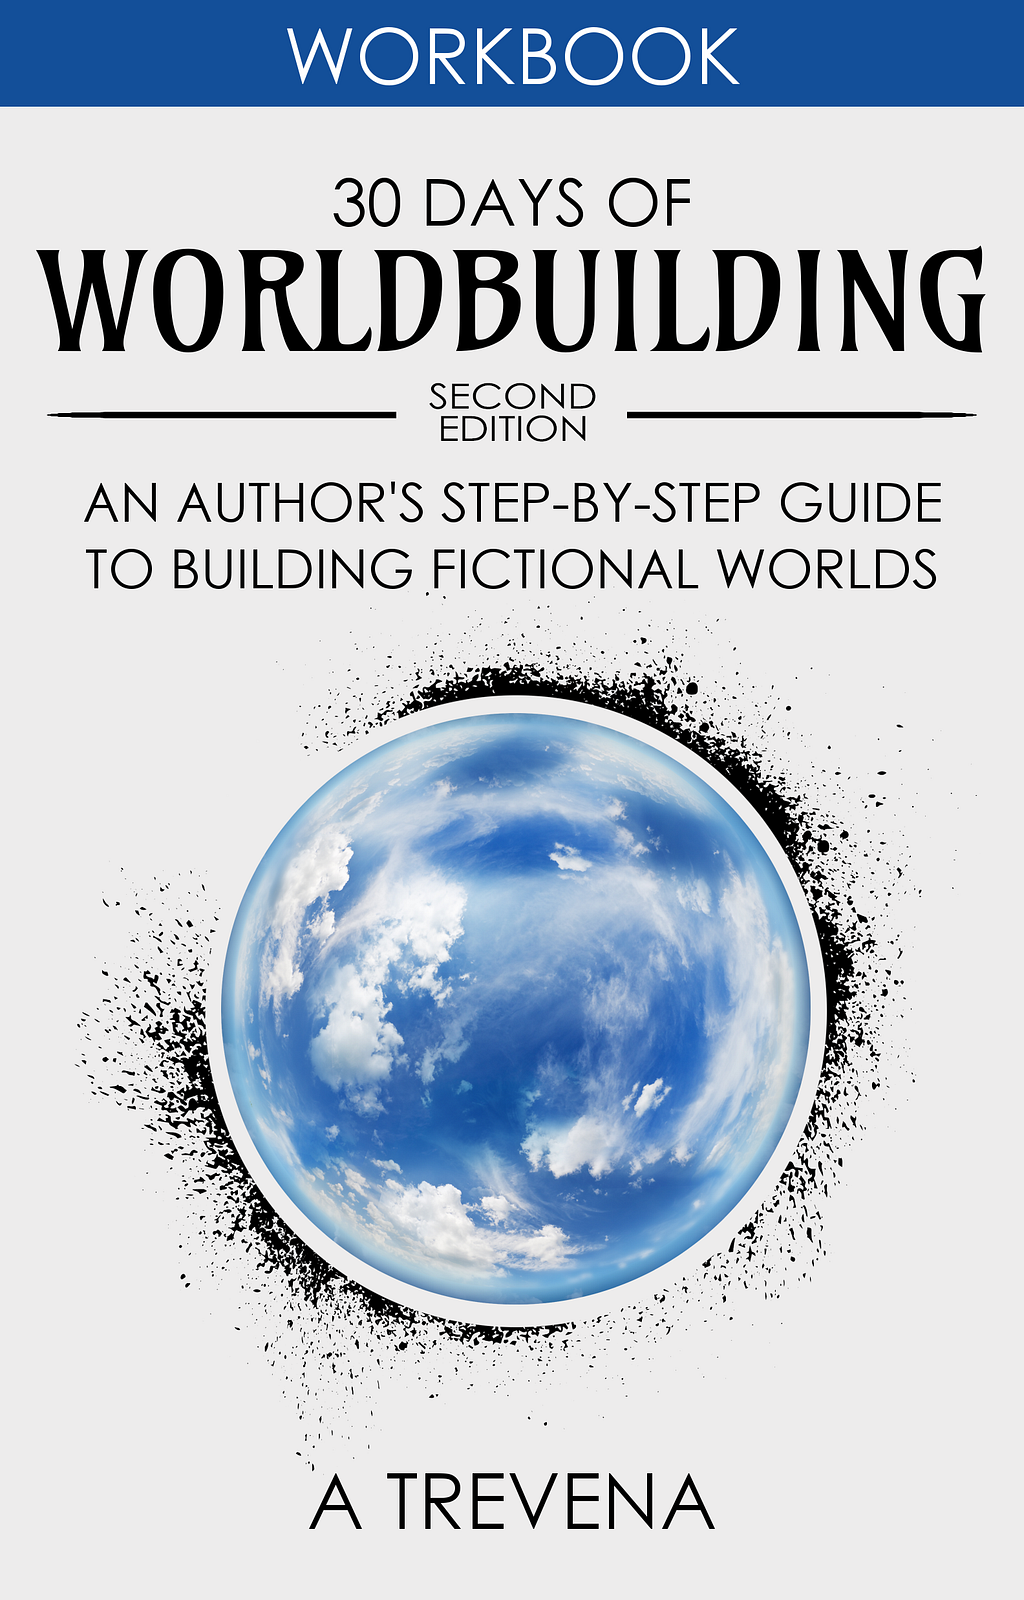 30 Days of Worldbuilding: An Author's Step-by-Step Guide to Building Fictional Worlds (Author Guides Book 1) E book